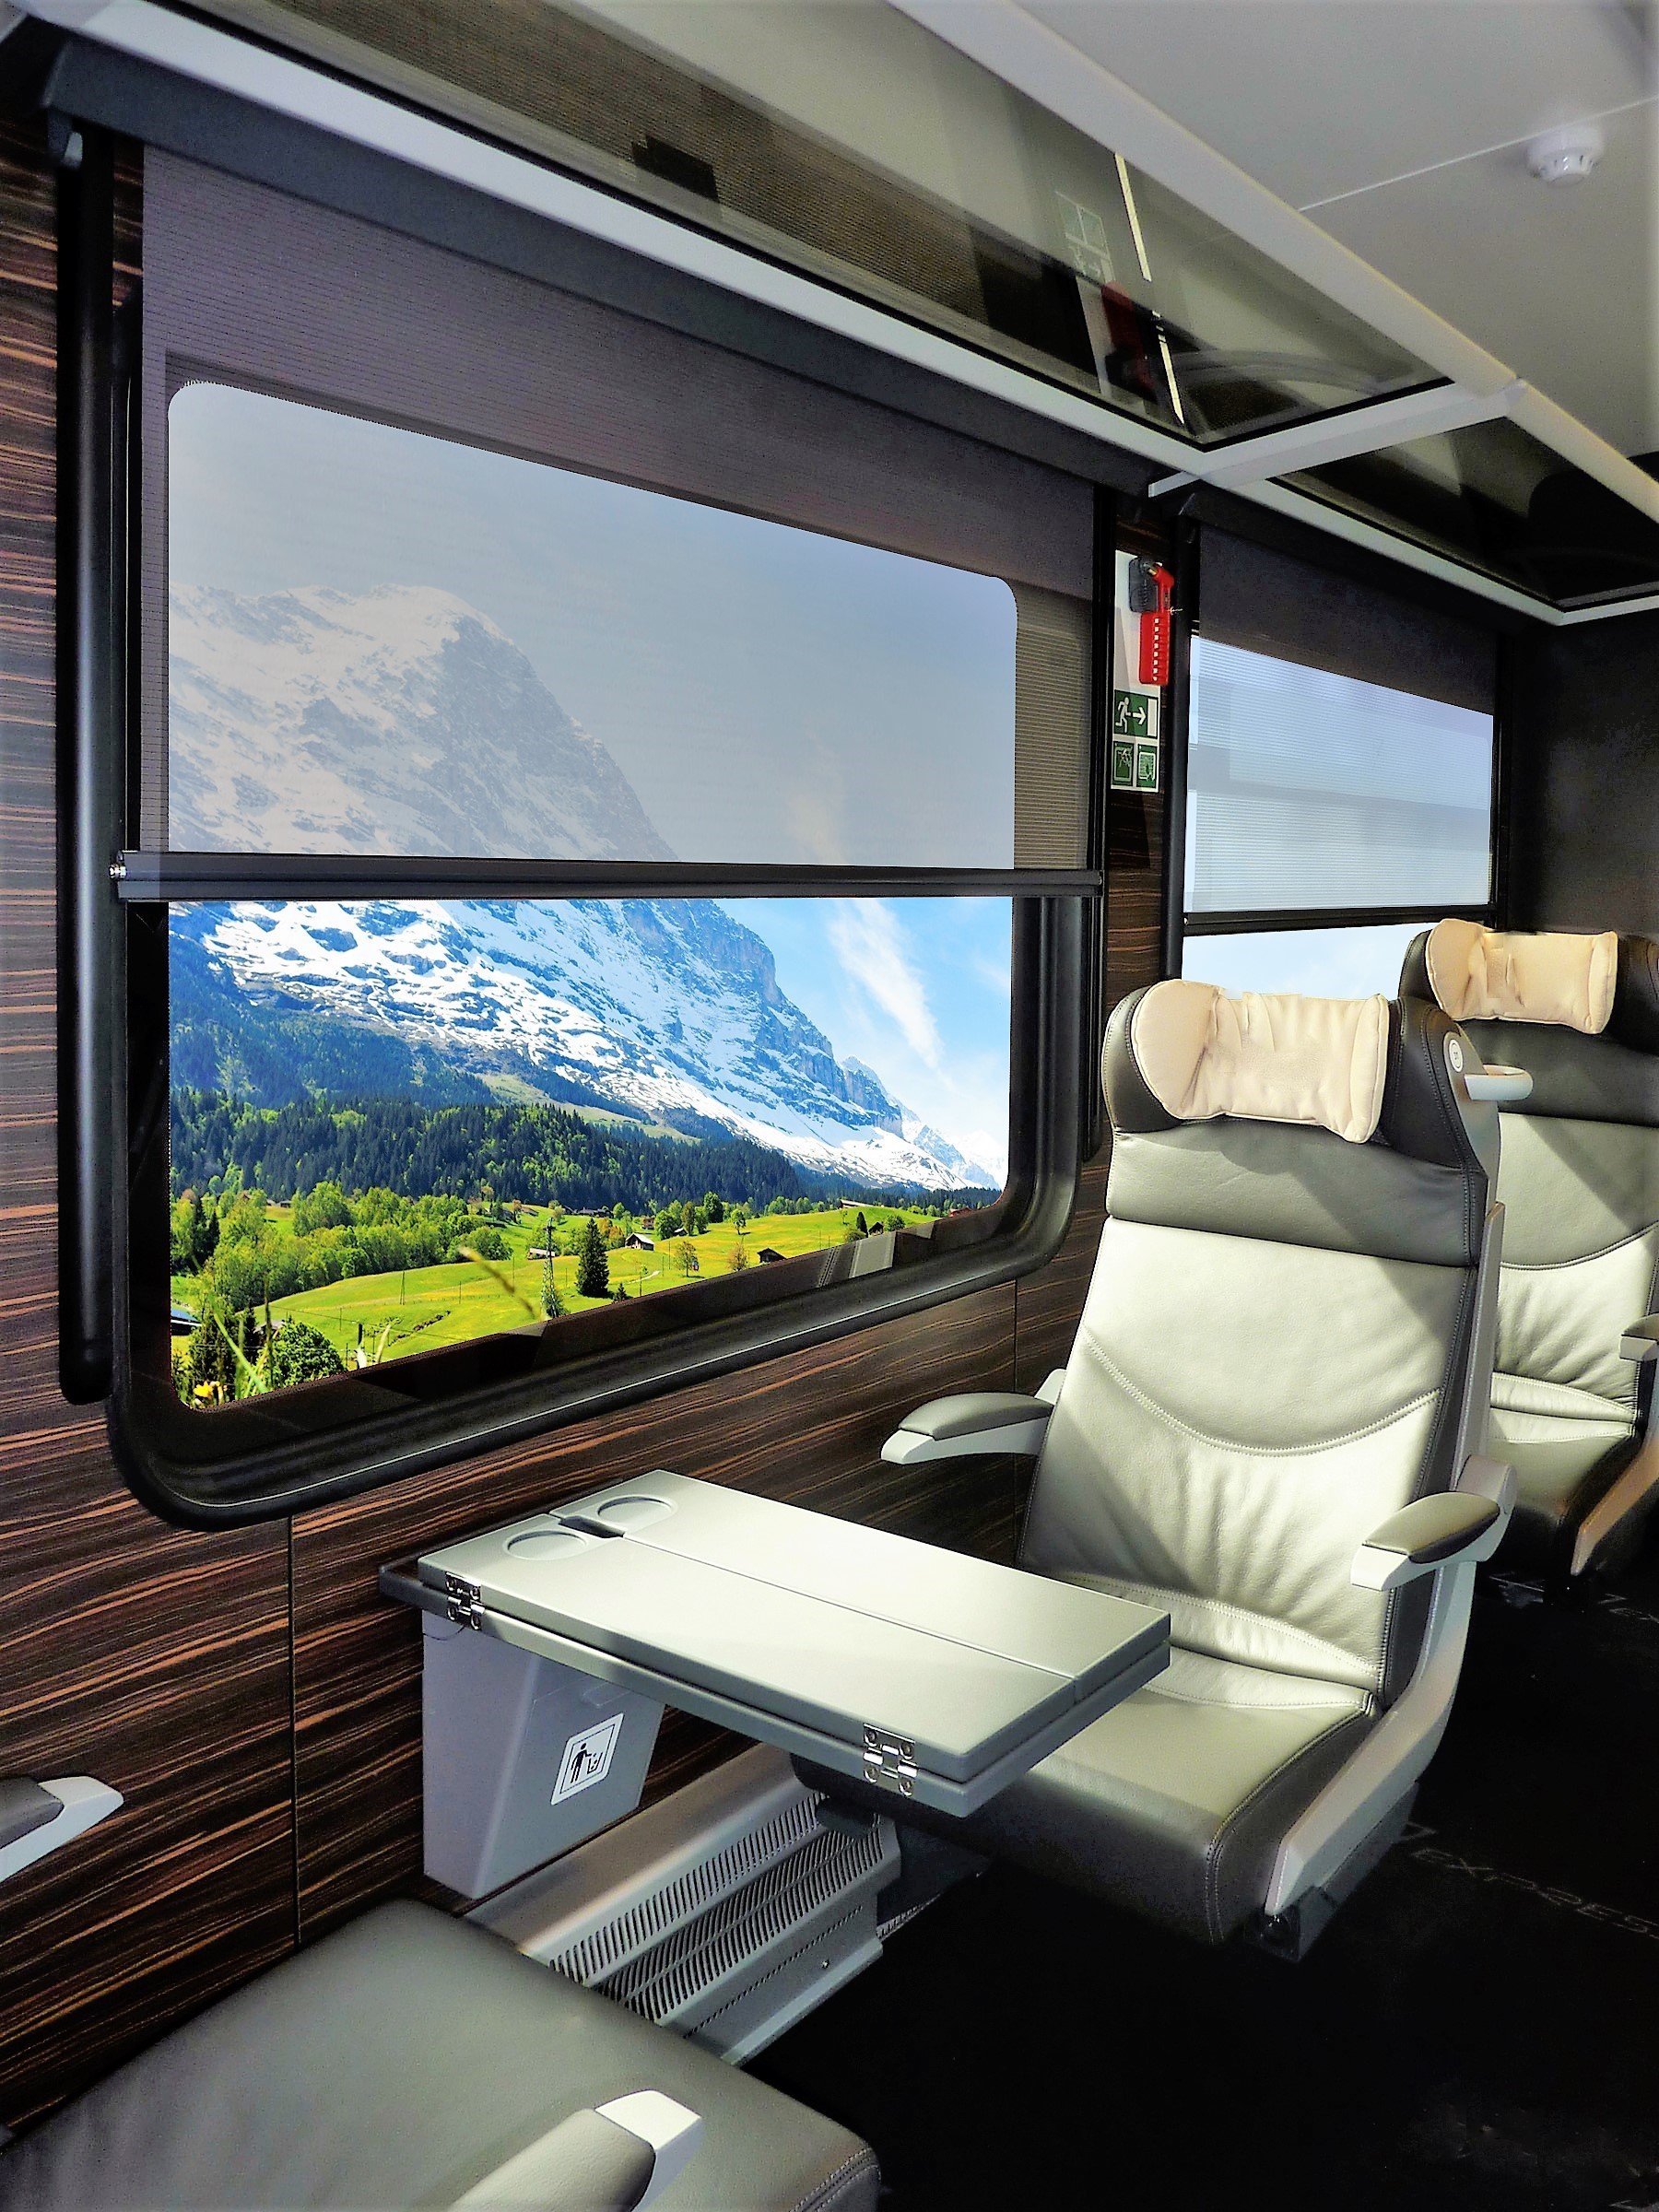 Roller blinds for passenger compartments